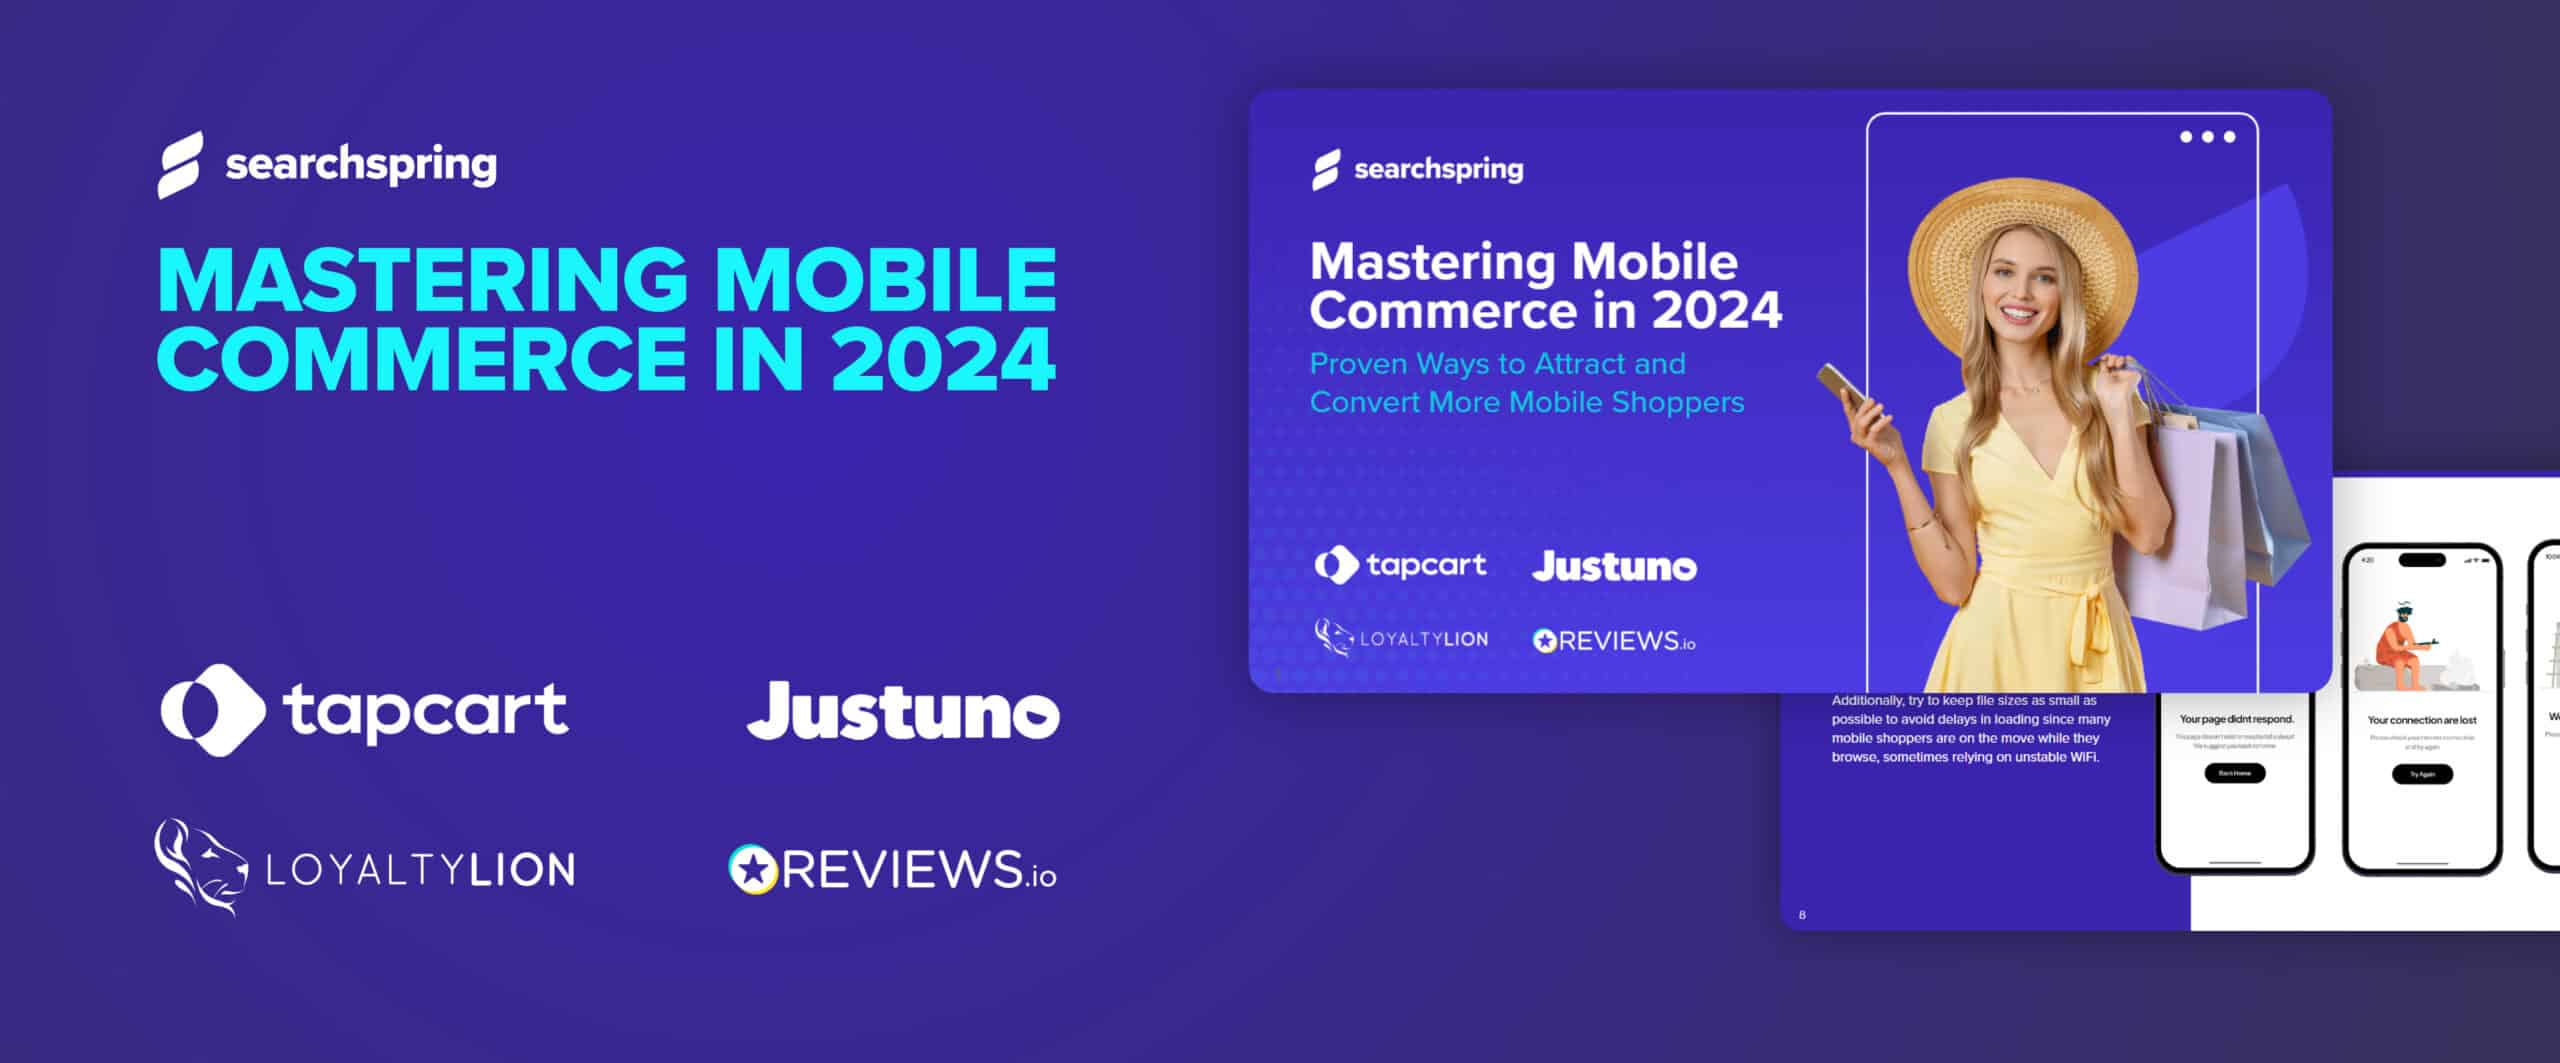 Mastering Mobile Commerce in 2024 Ebook